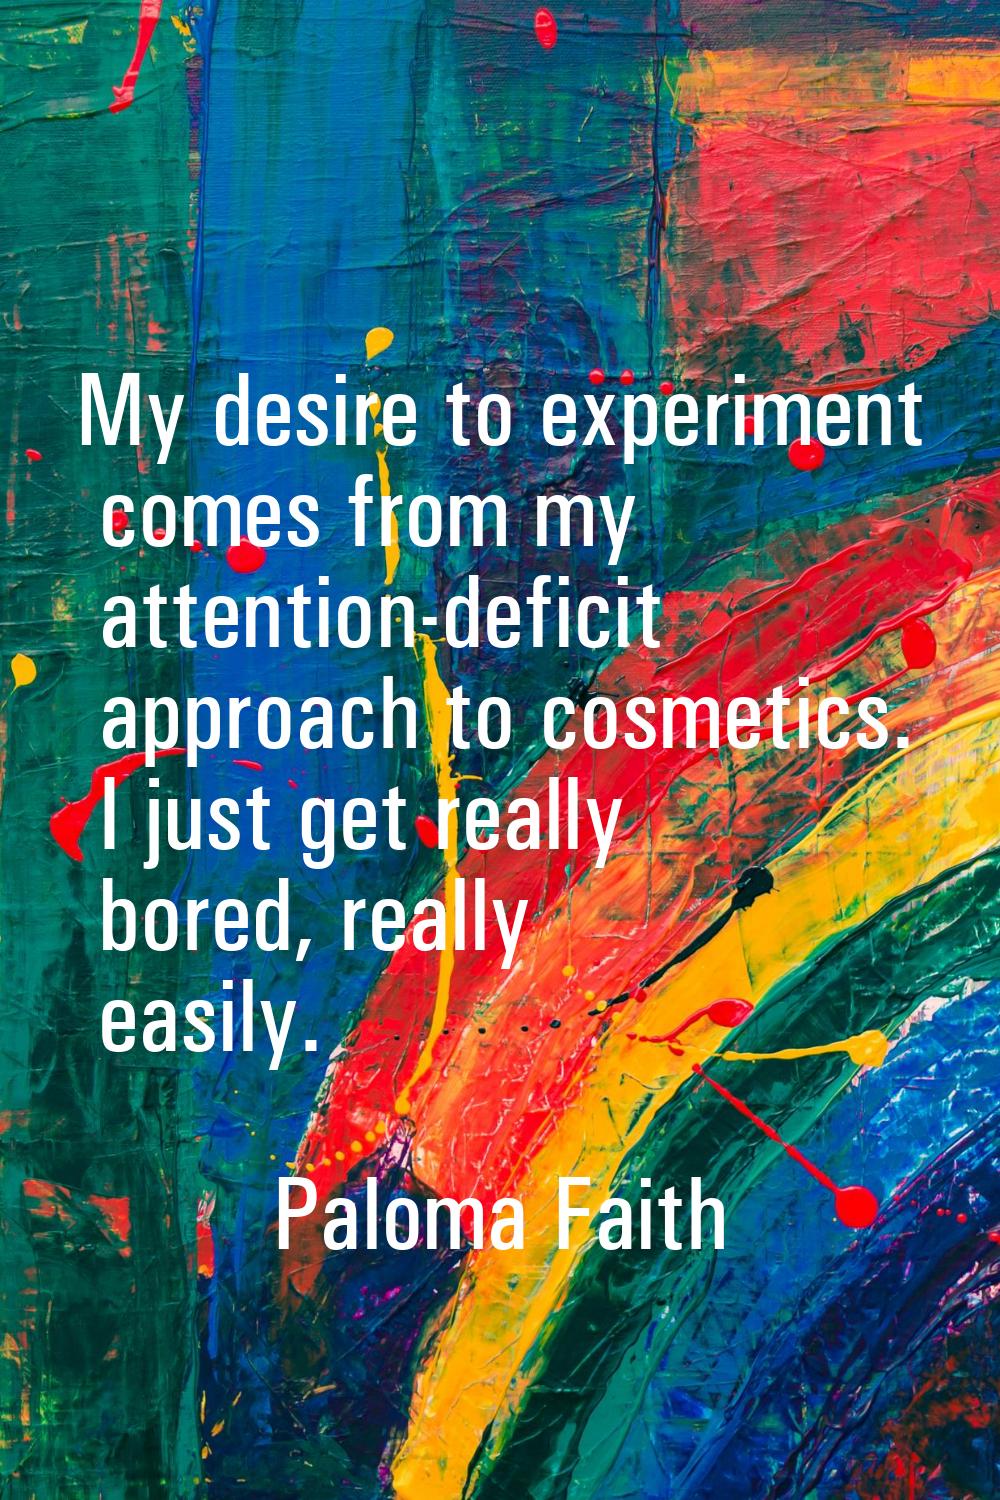 My desire to experiment comes from my attention-deficit approach to cosmetics. I just get really bo